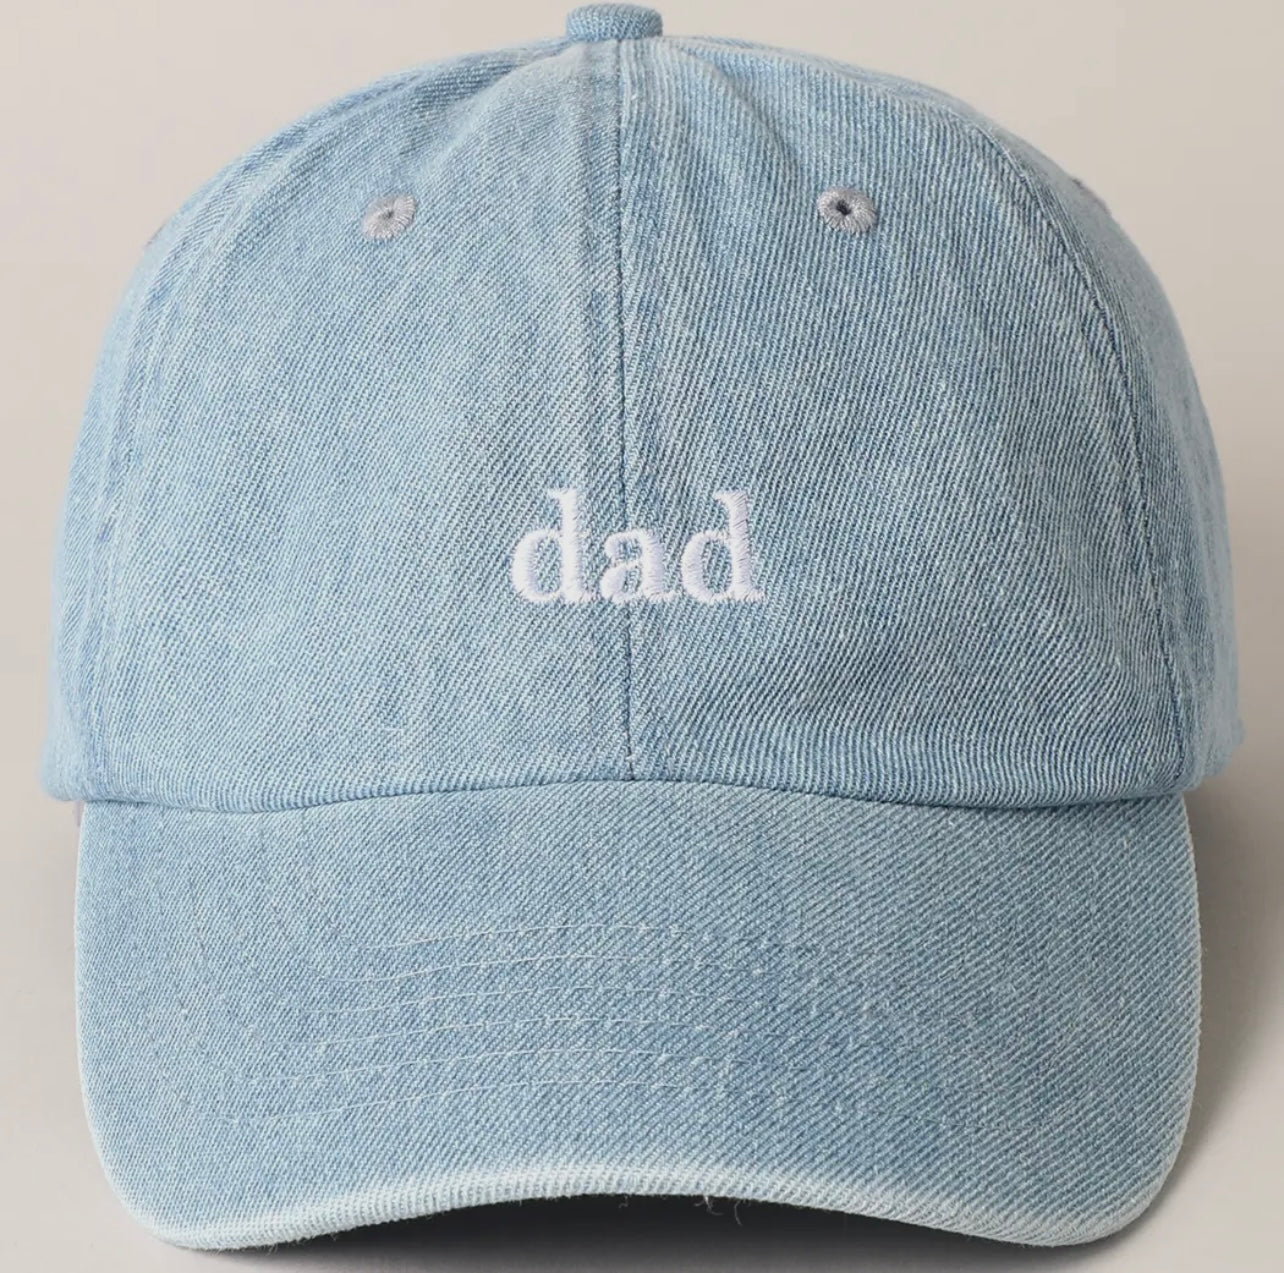 Mini Text Match with Dad and Mom Embroidery Cap